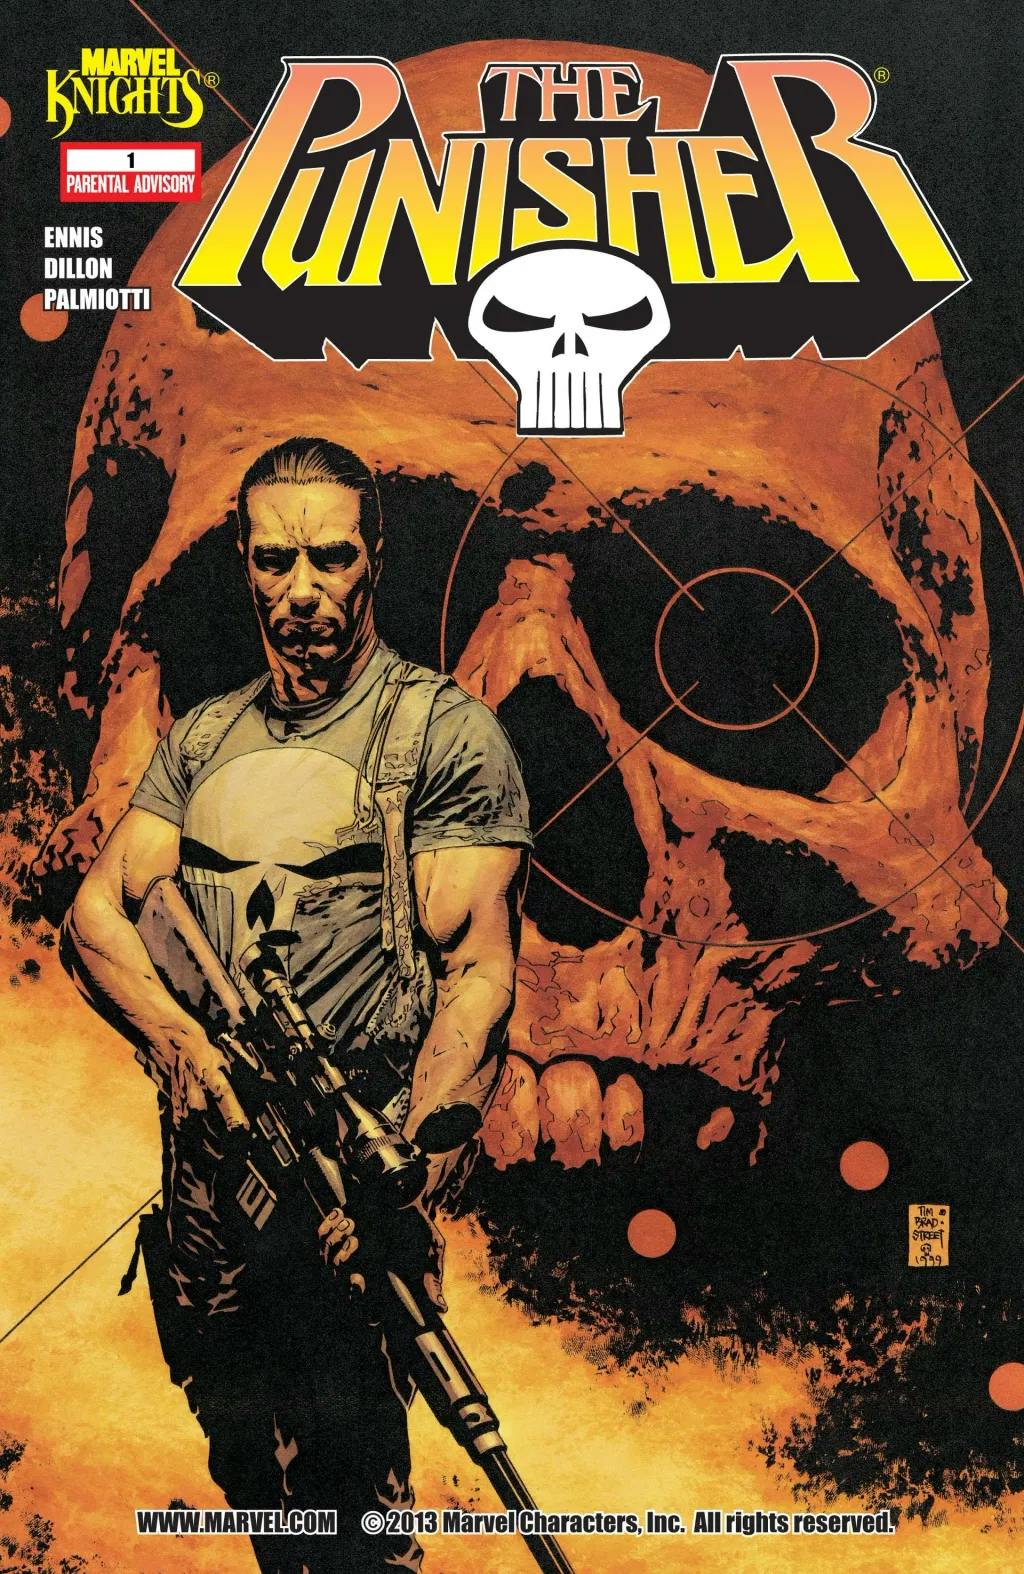 The Punisher #1 by Garth Ennis and Steve Dillon